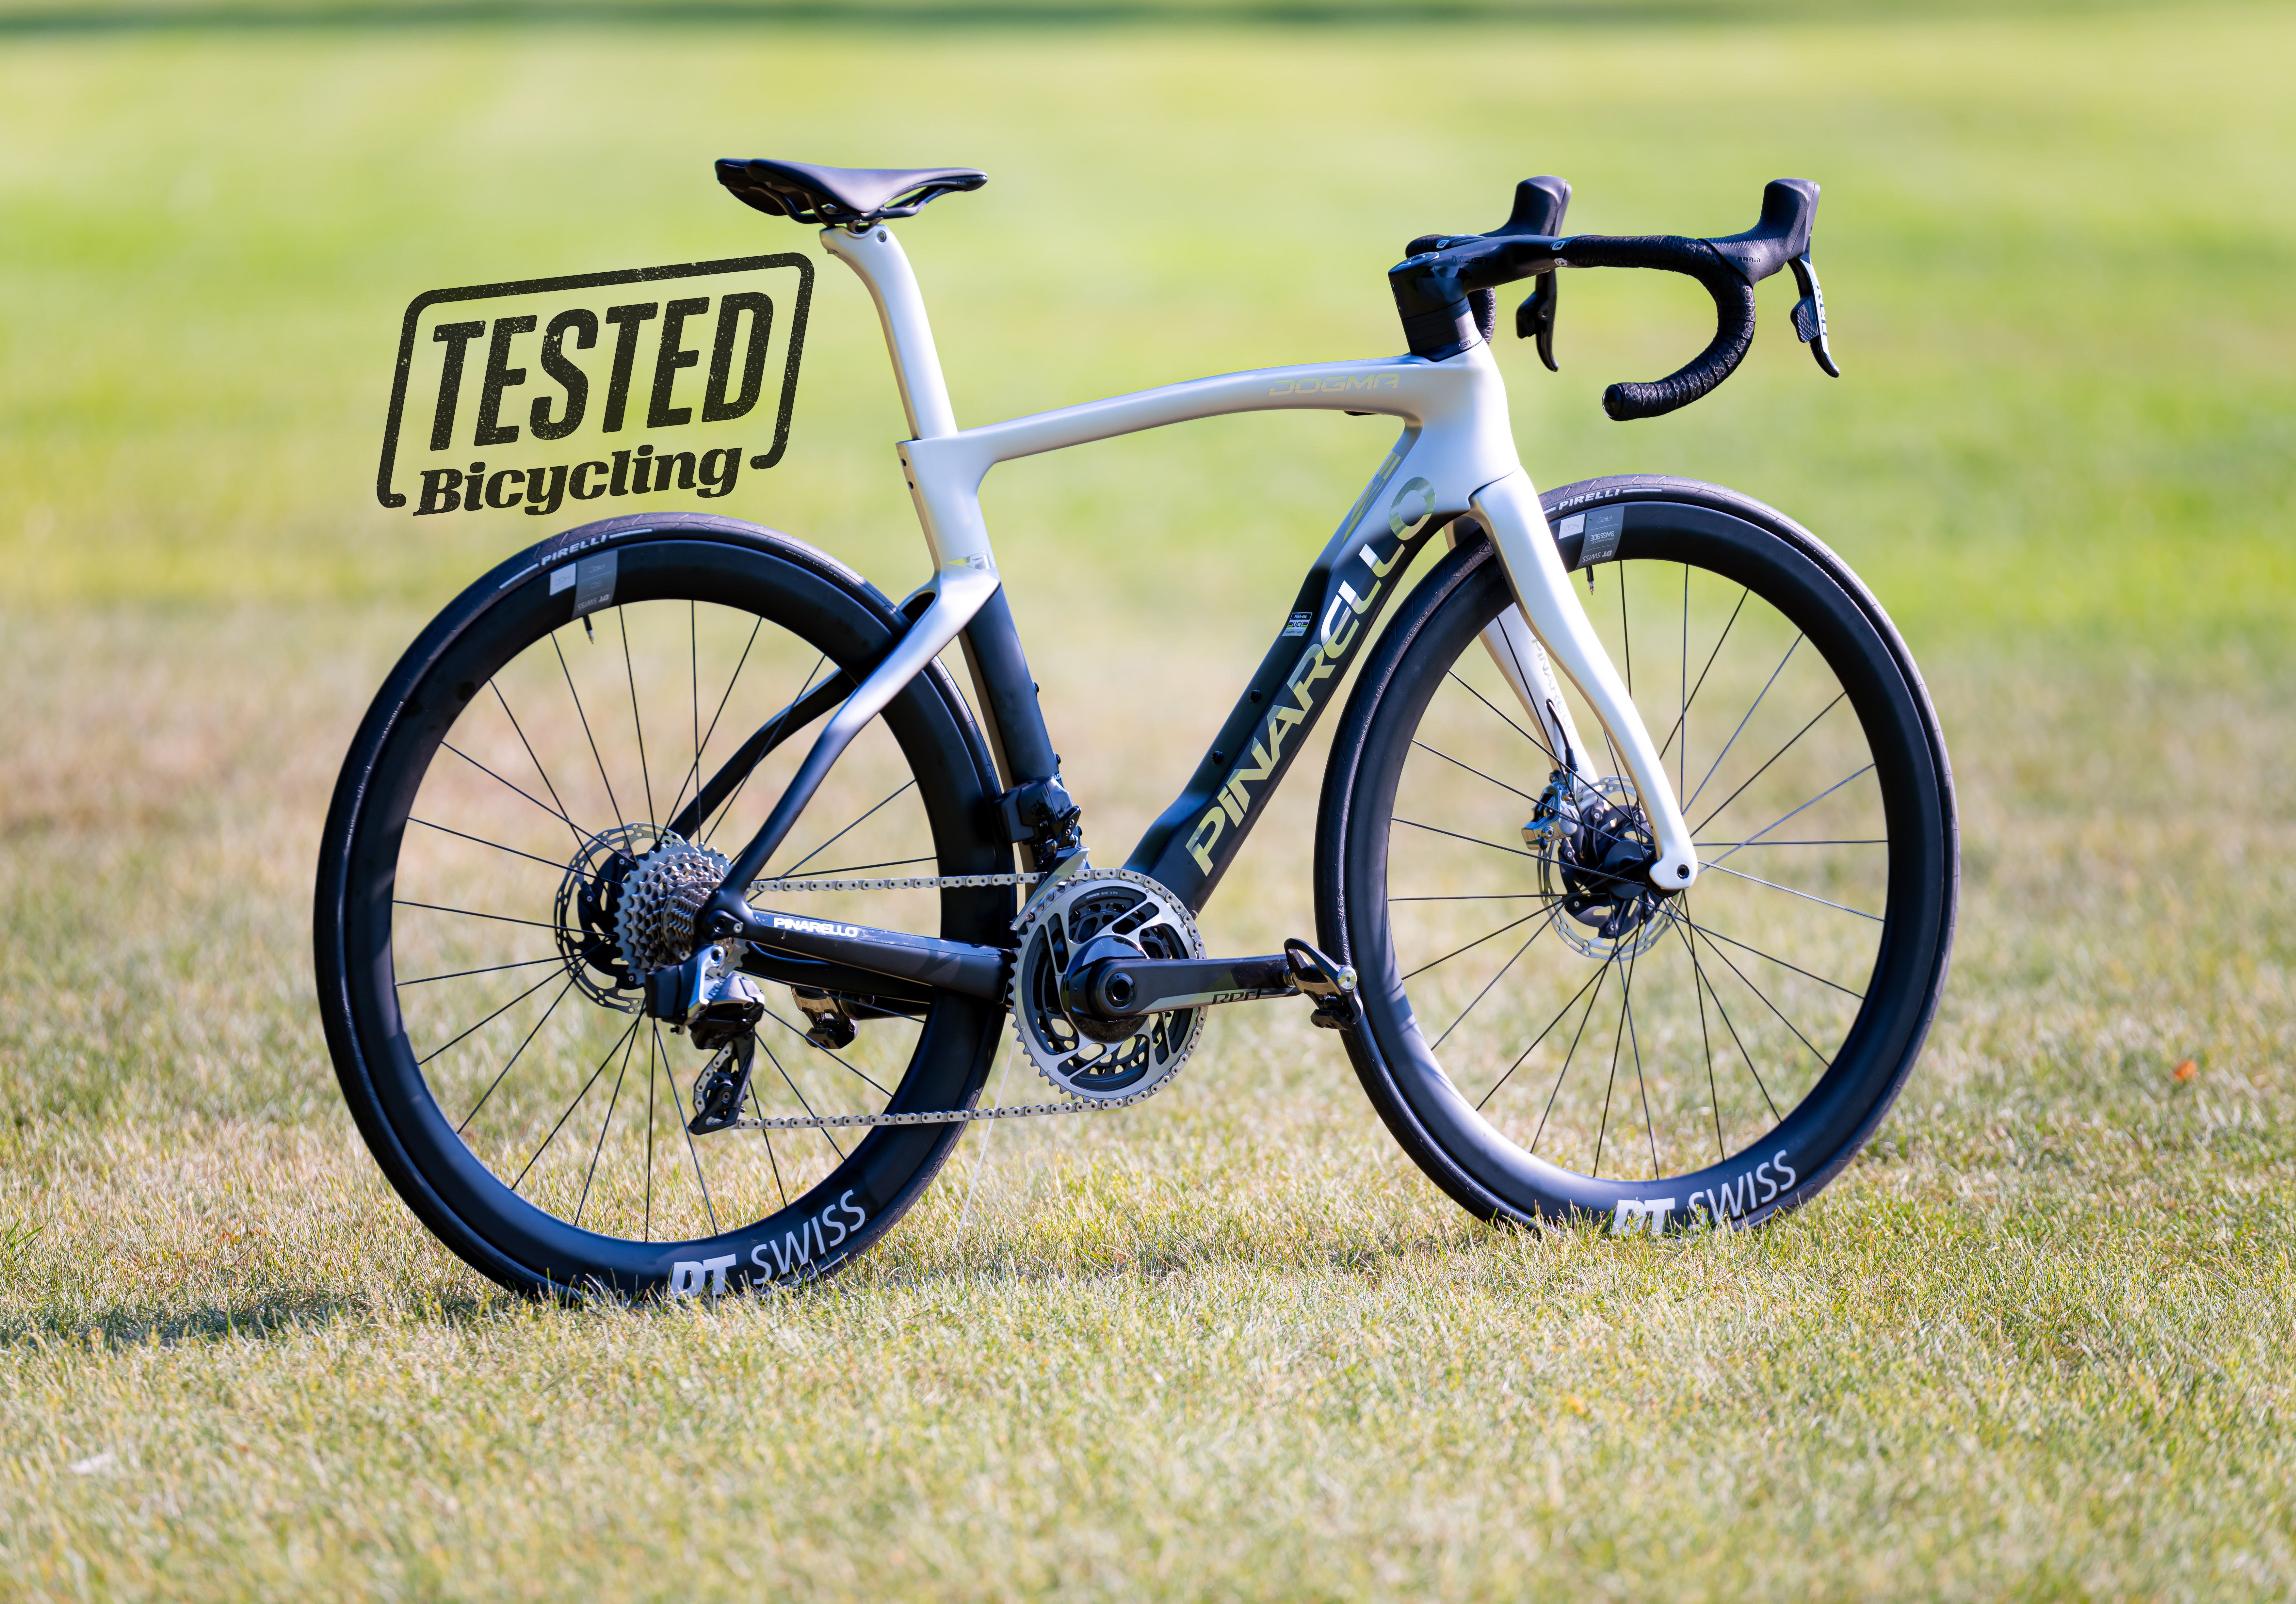 The brand new Pinarello DOGMA F on review - Fast on principle